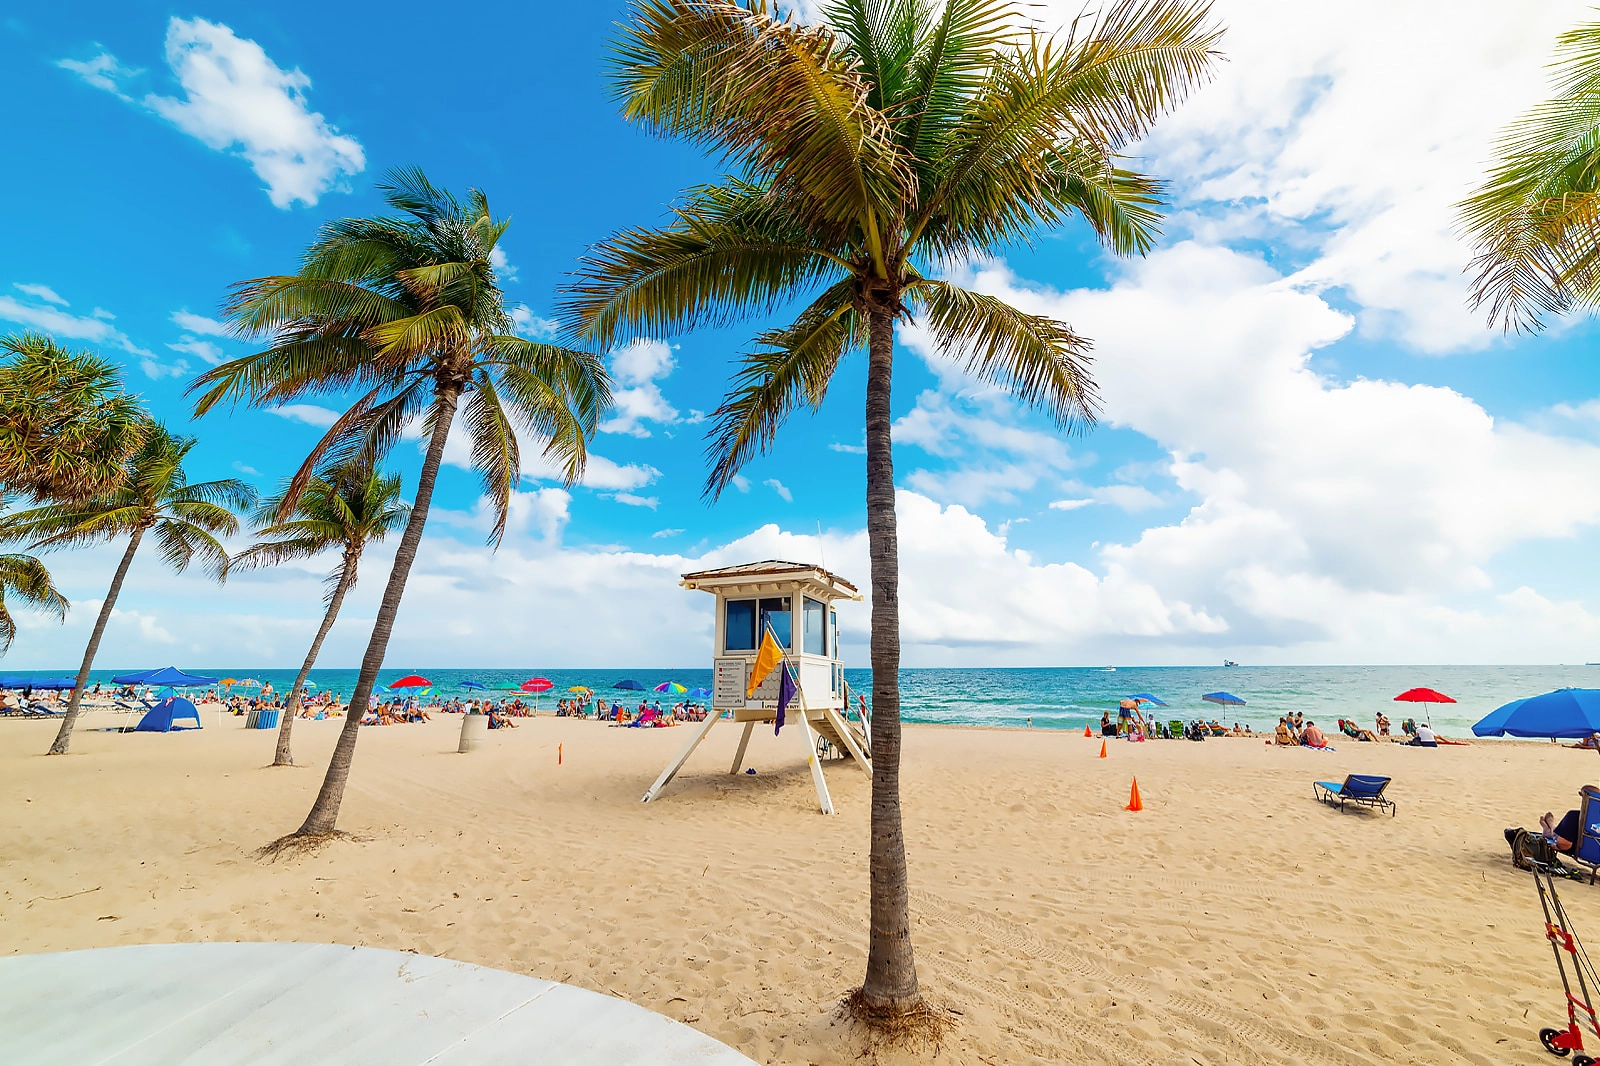  Fort Lauderdale  strand - East coast of USA